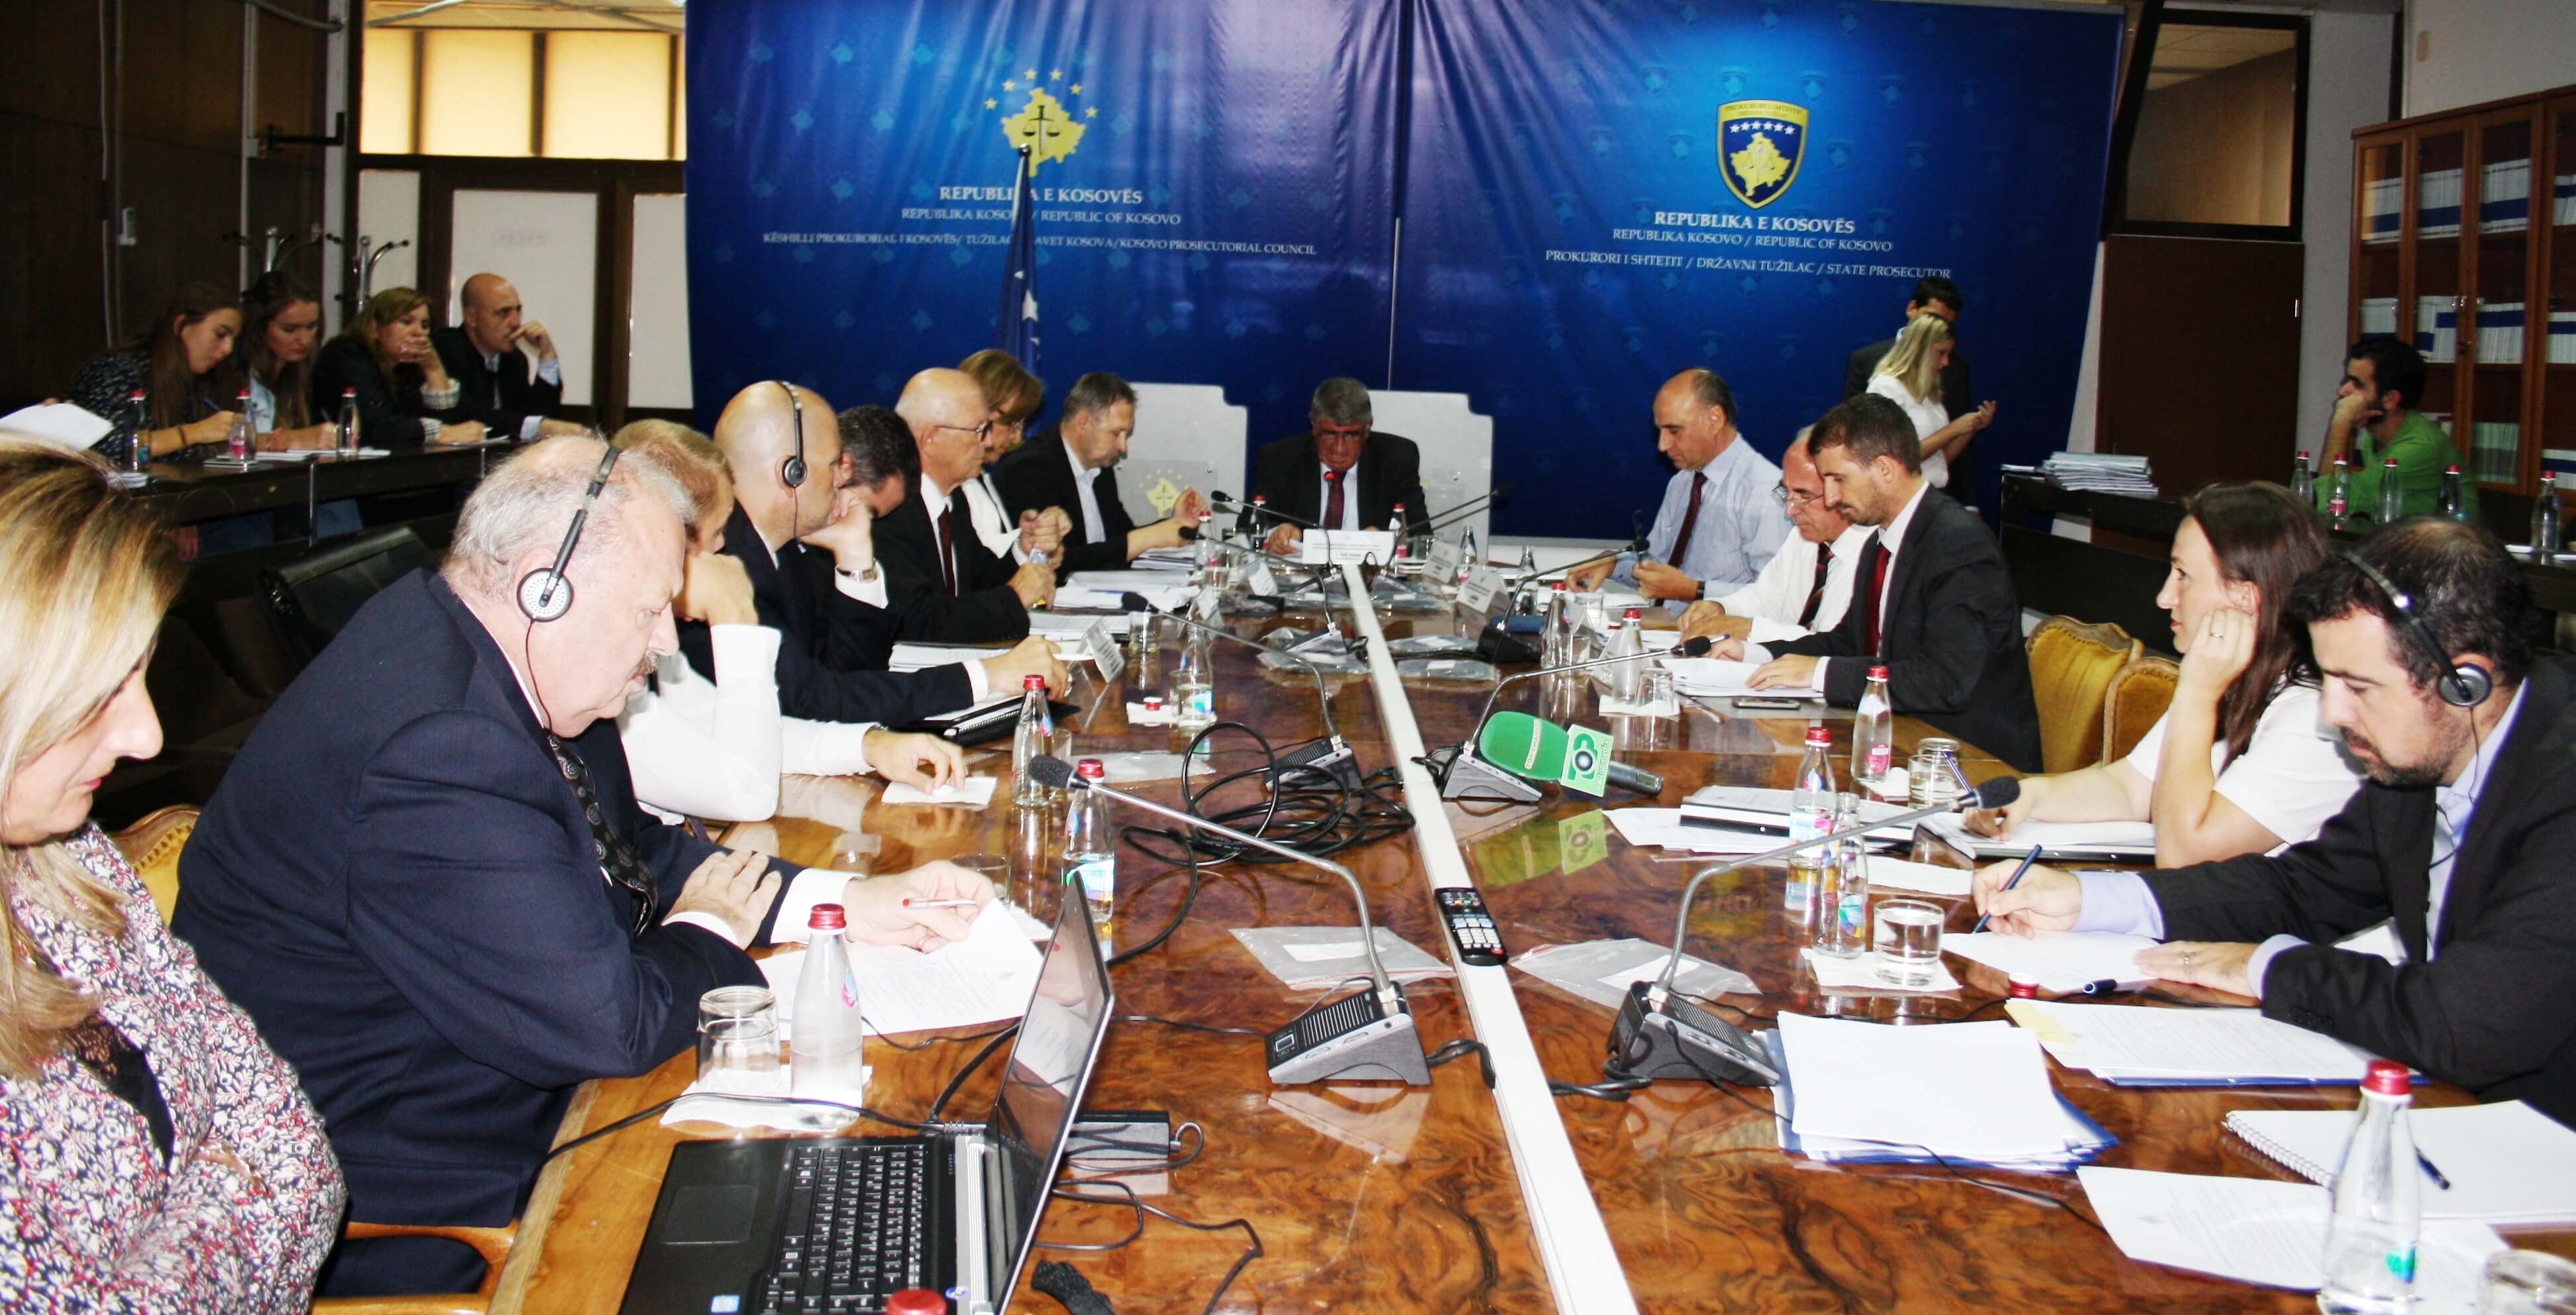 NEXT MEETING OF KOSOVO PROSECUTORIAL COUNCIL IS HELD,9th OF SEPTEMBER 2014